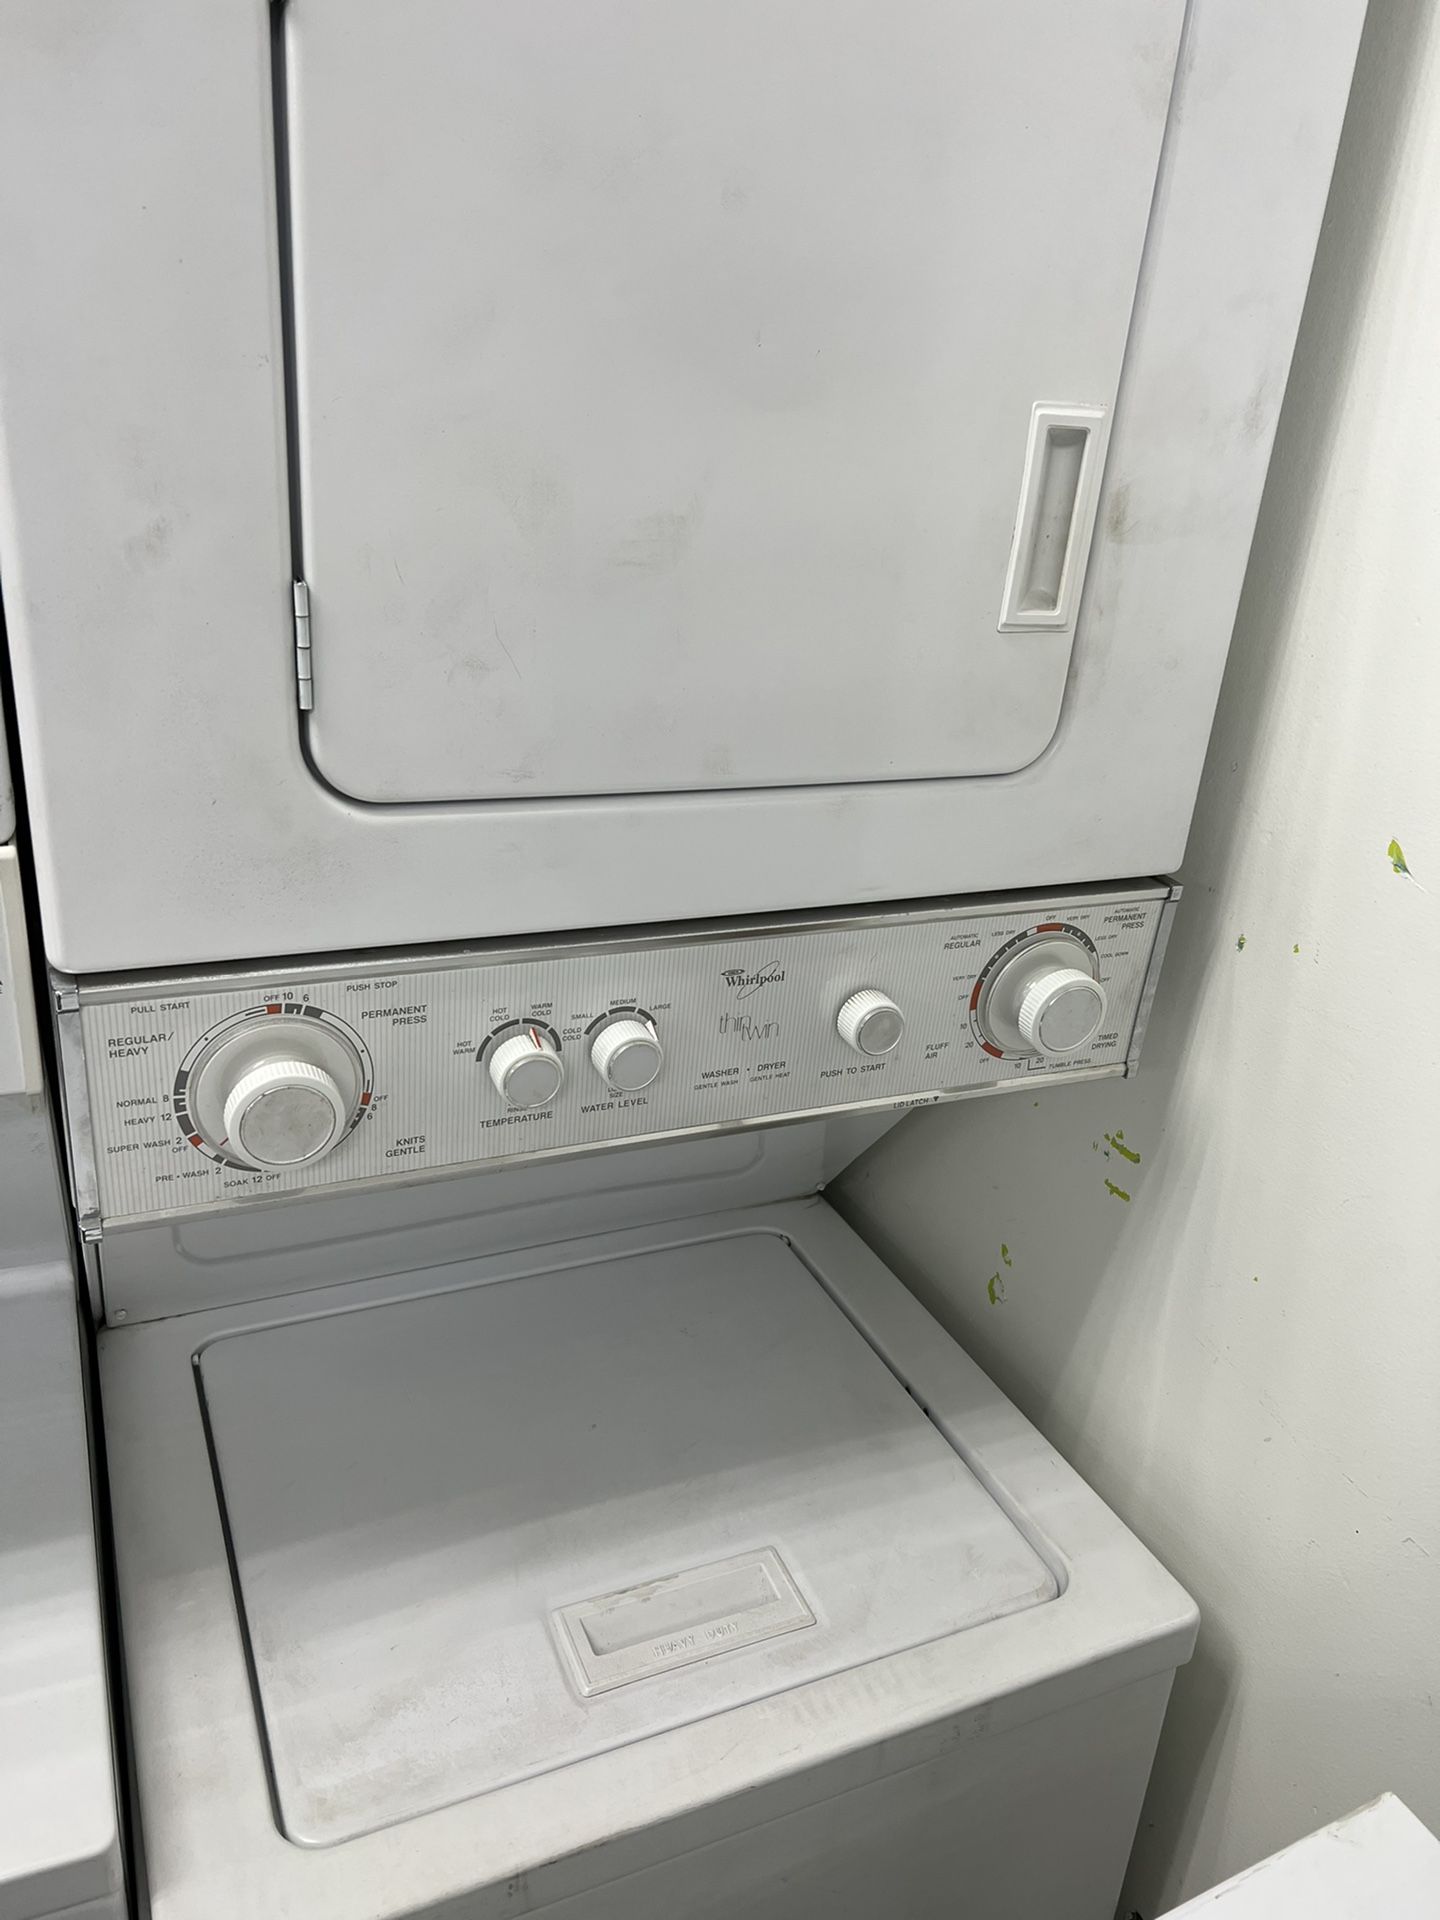 Small Stackable Washer And Electric Dryer Whirlpool In Great Condition (3 Months Guaranteed )